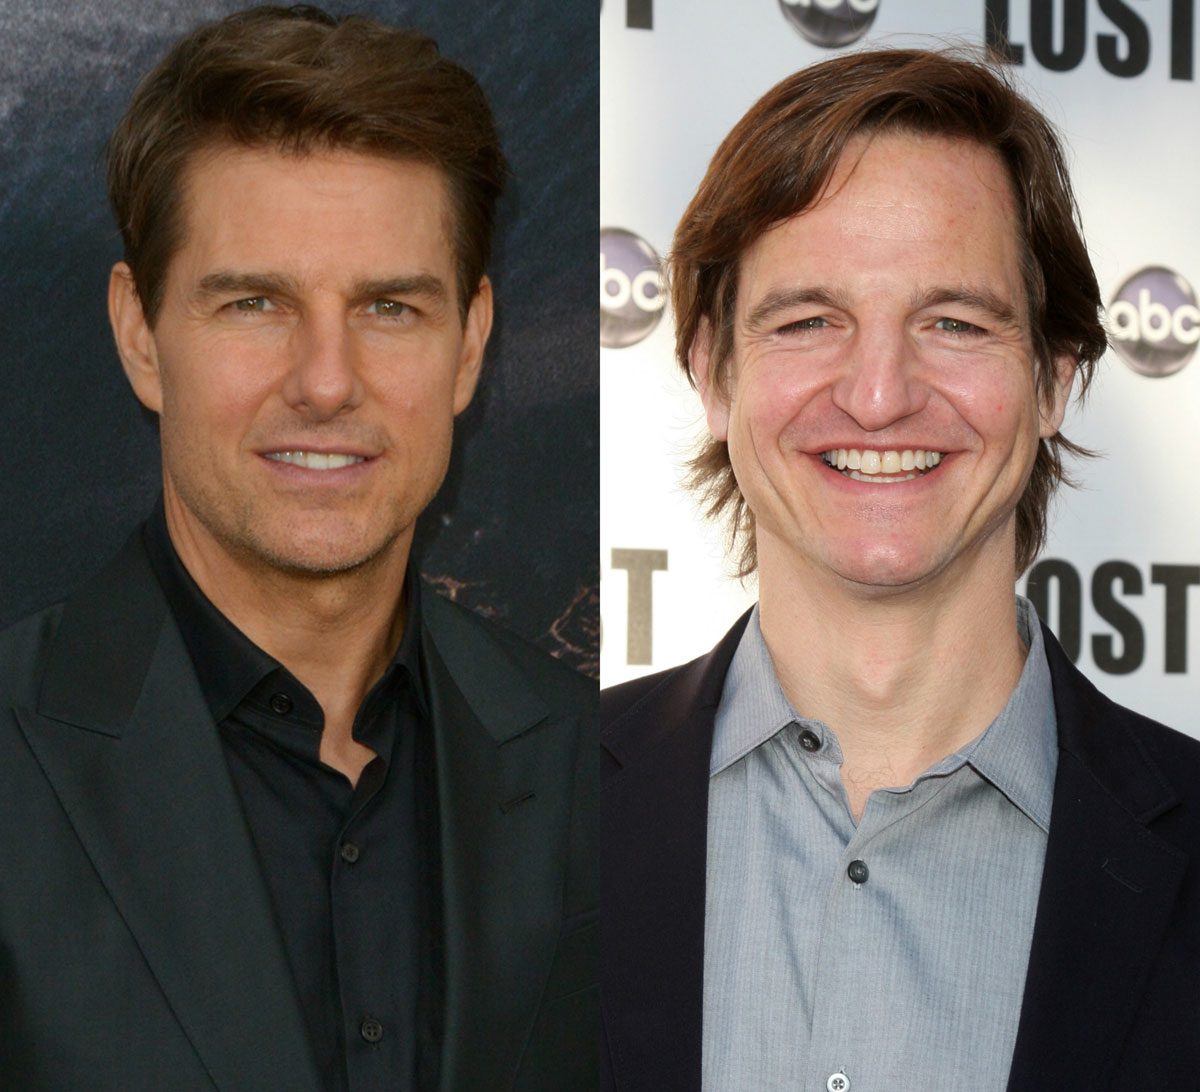 Tom Cruise and William Mapother are related